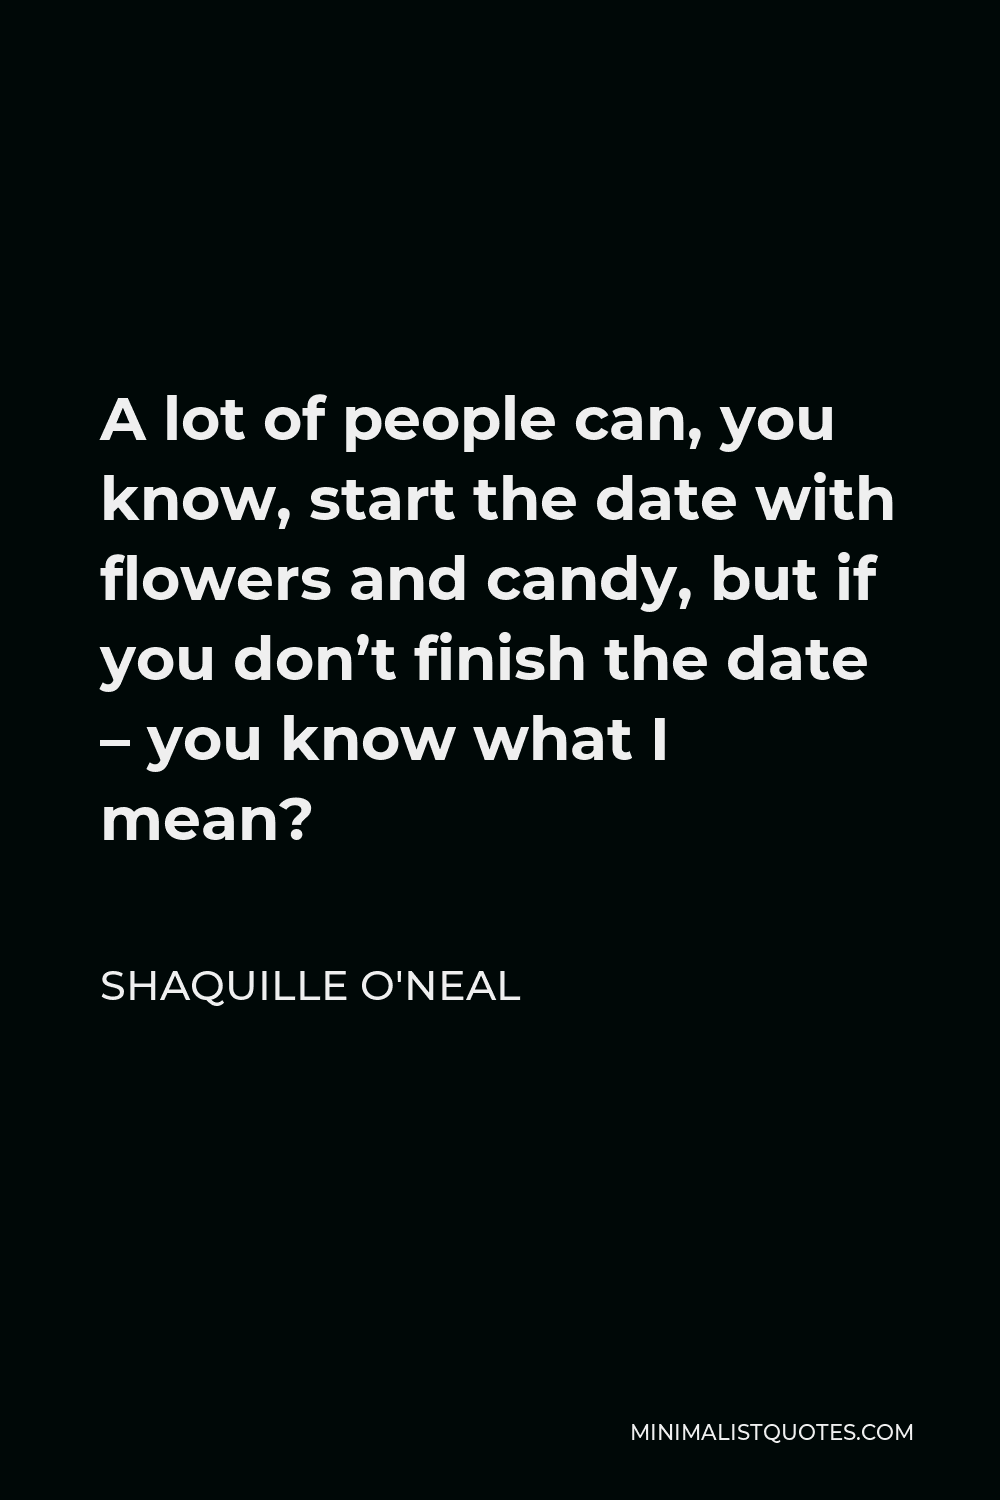 Shaquille O'Neal Quote - A lot of people can, you know, start the date with flowers and candy, but if you don’t finish the date – you know what I mean?